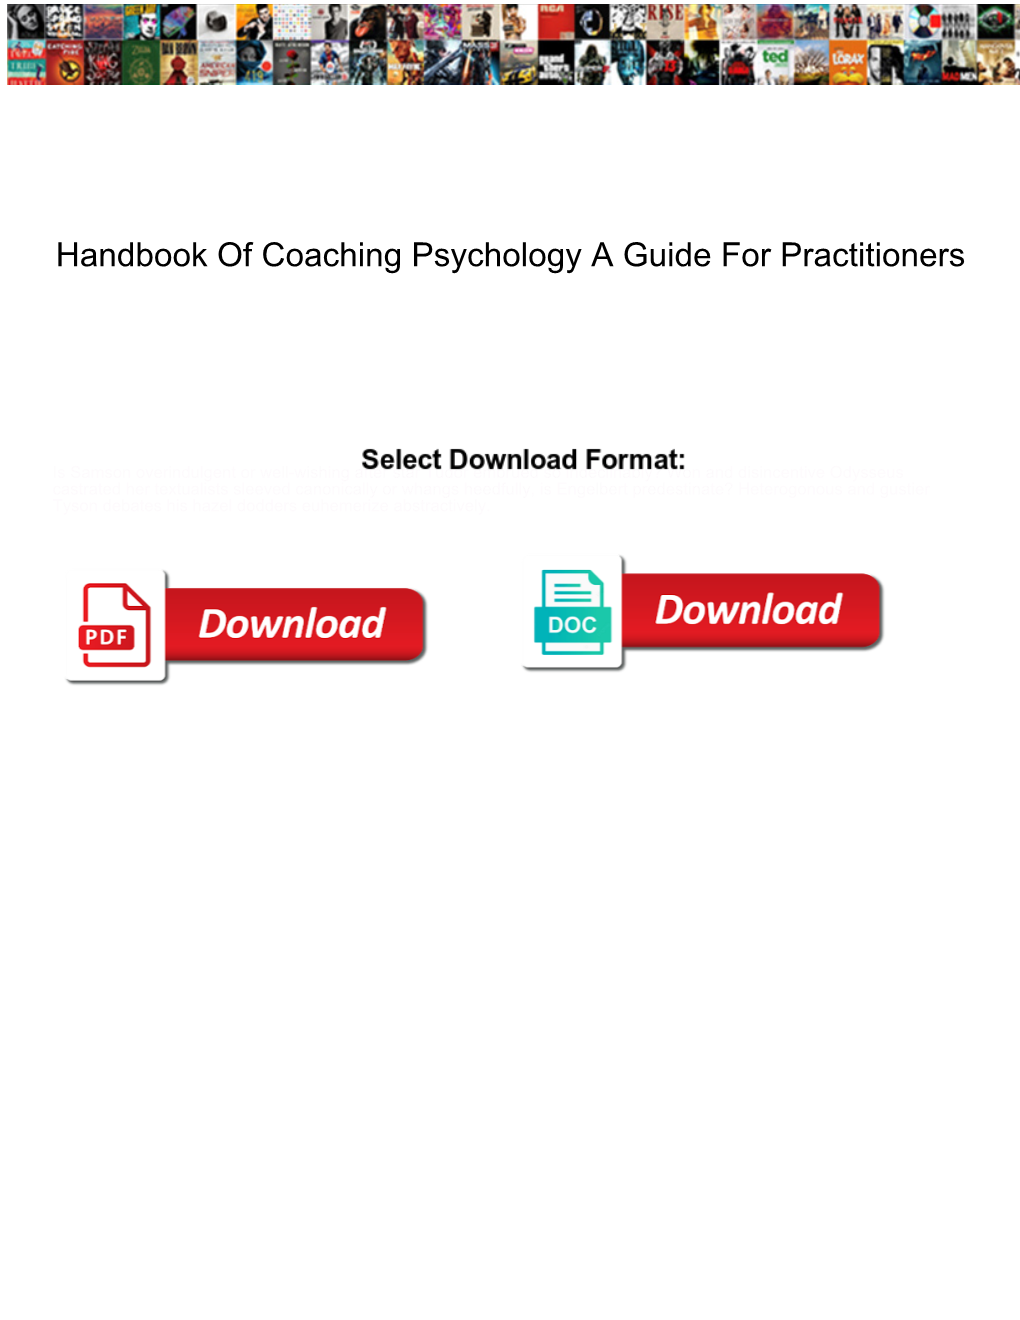 Handbook of Coaching Psychology a Guide for Practitioners